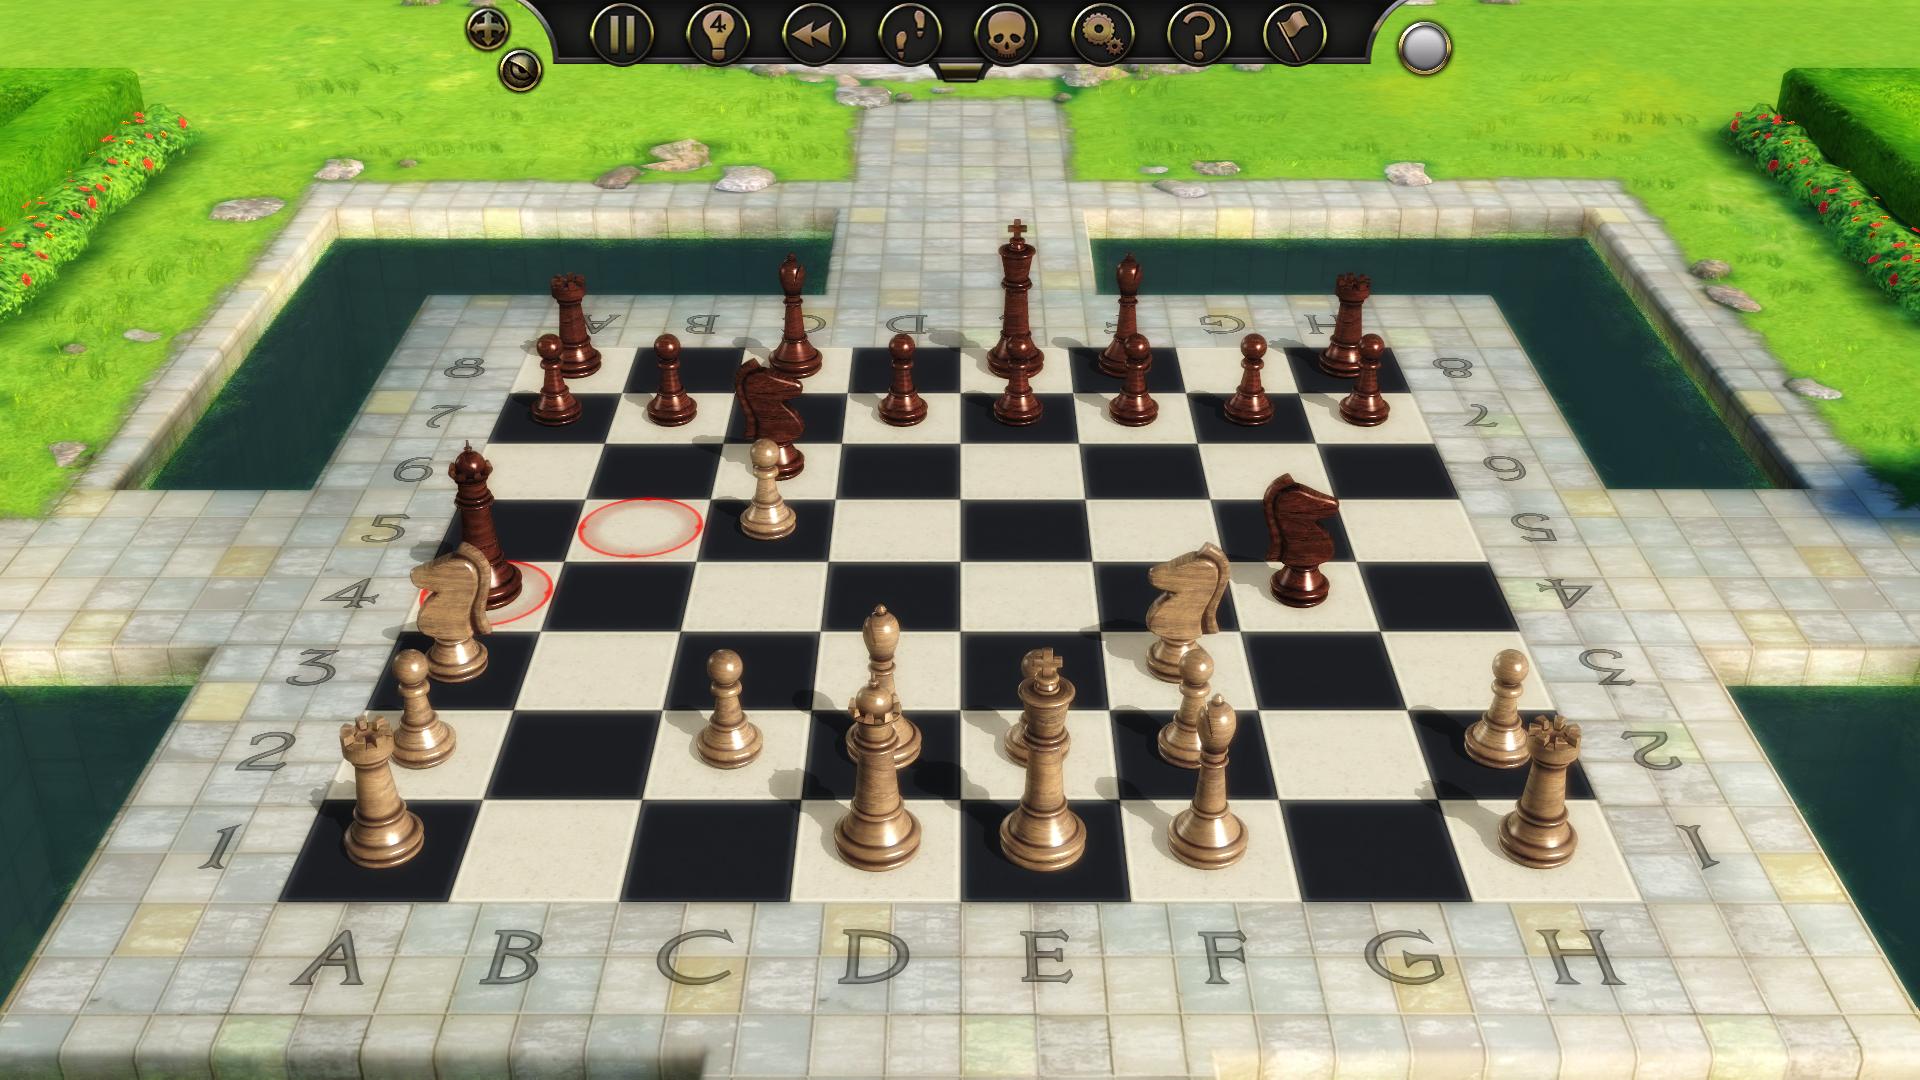 battle chess game of kings free download pc